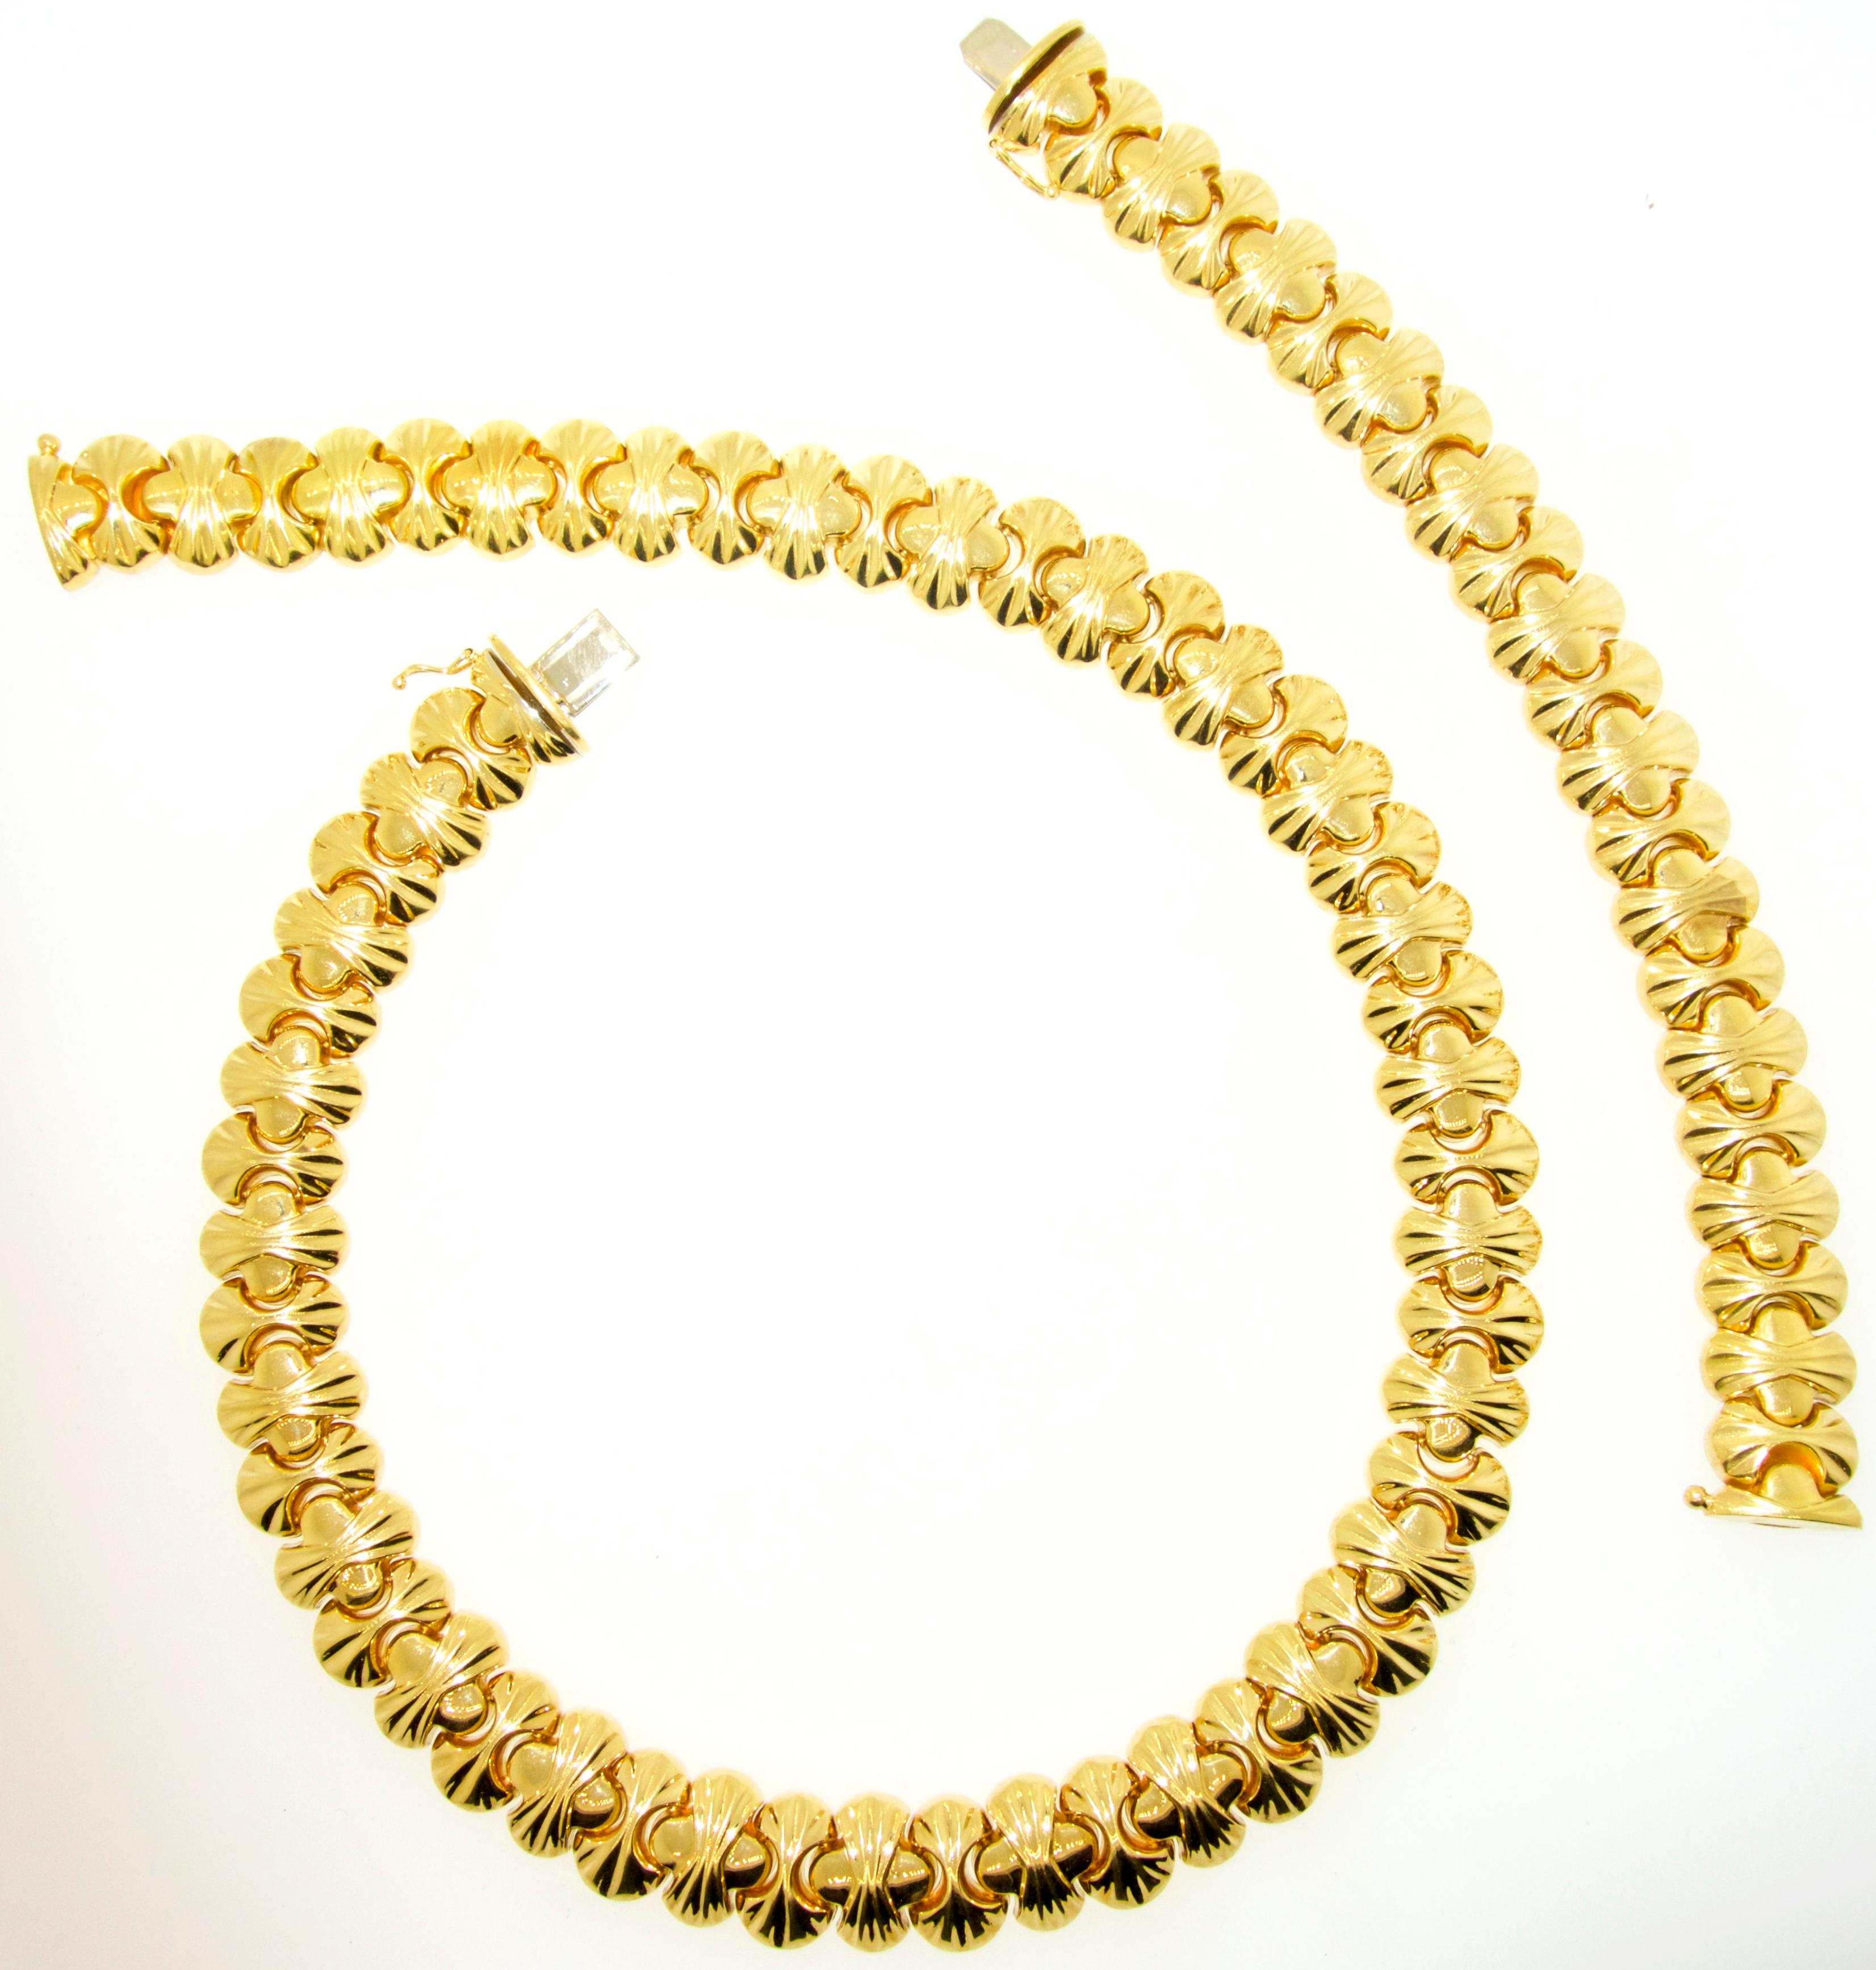 18K gold necklace choker length and a matching 7 inch bracelet.  The set weighs 115.71 grams.